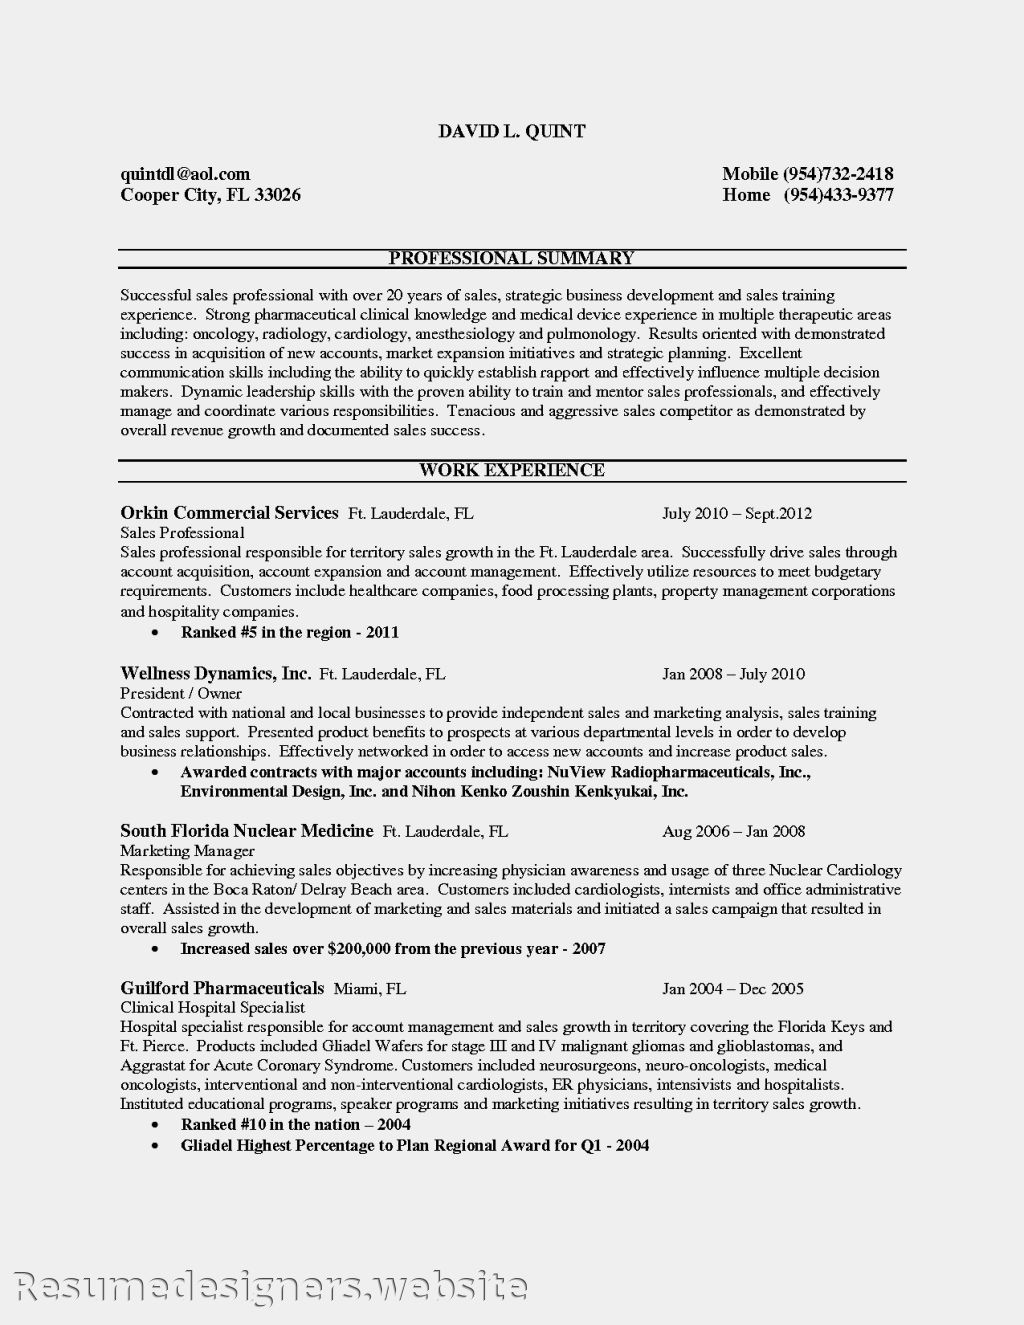 Sample Pharmaceutical Sales Resume No Experience Resume for Medical Sales Entry Level â Resume Samples